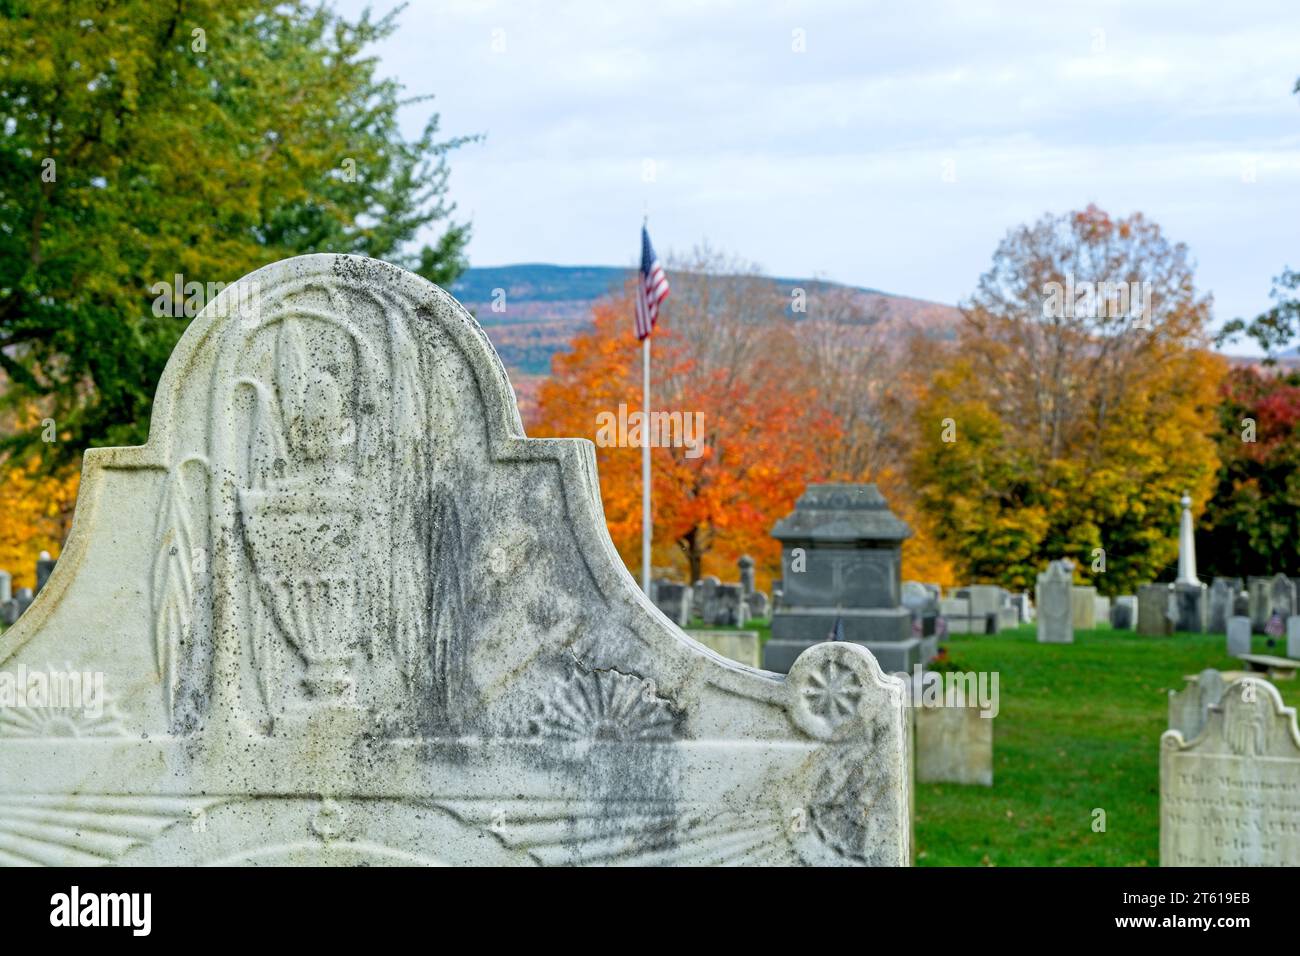 Close up of ornate headstone at 1806 Old First Congregational church cemetery distant hillside covered in autumn leave colors in Bennington Vermont Stock Photo